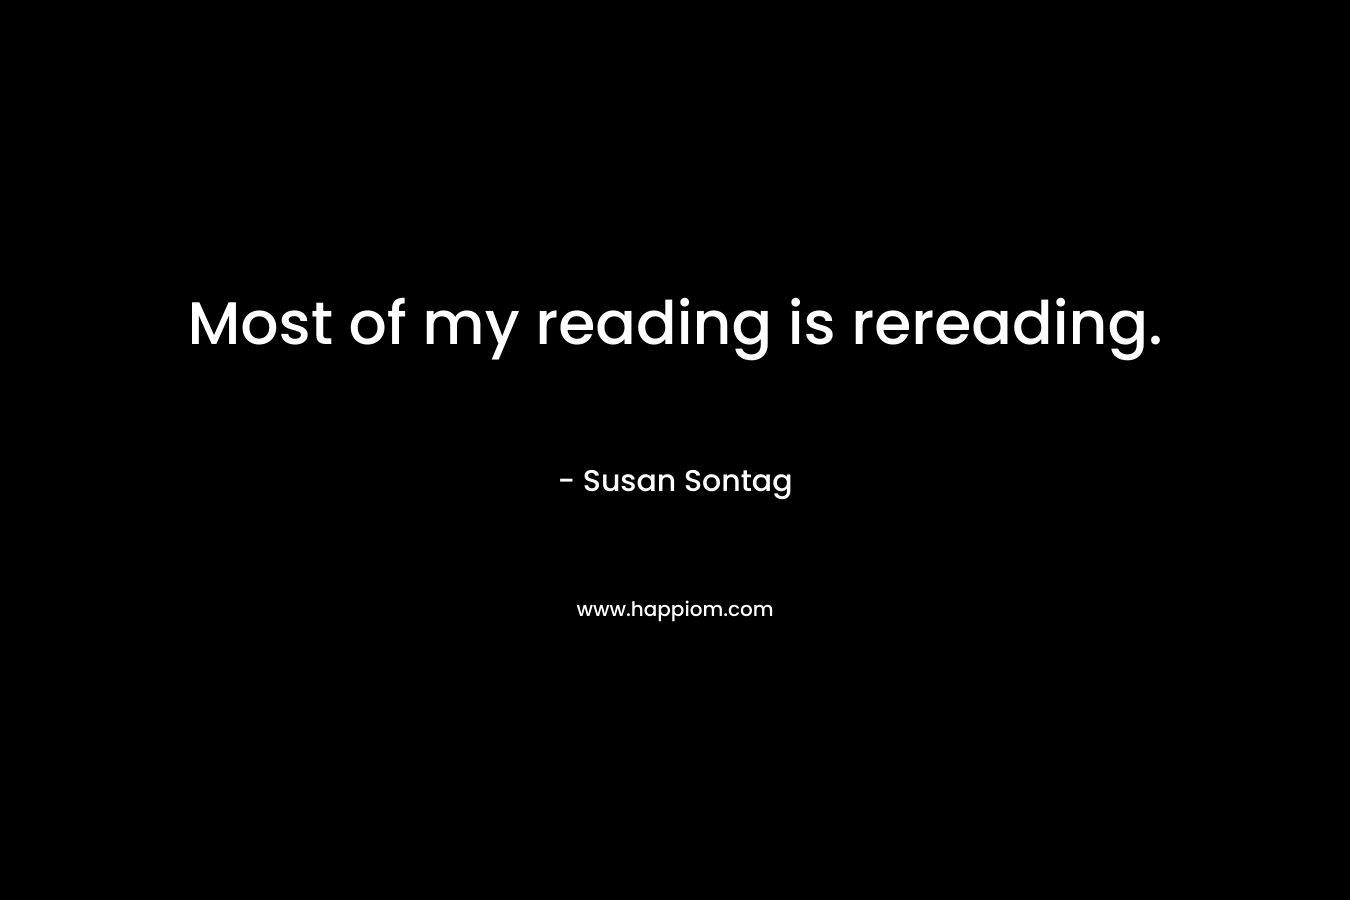 Most of my reading is rereading.